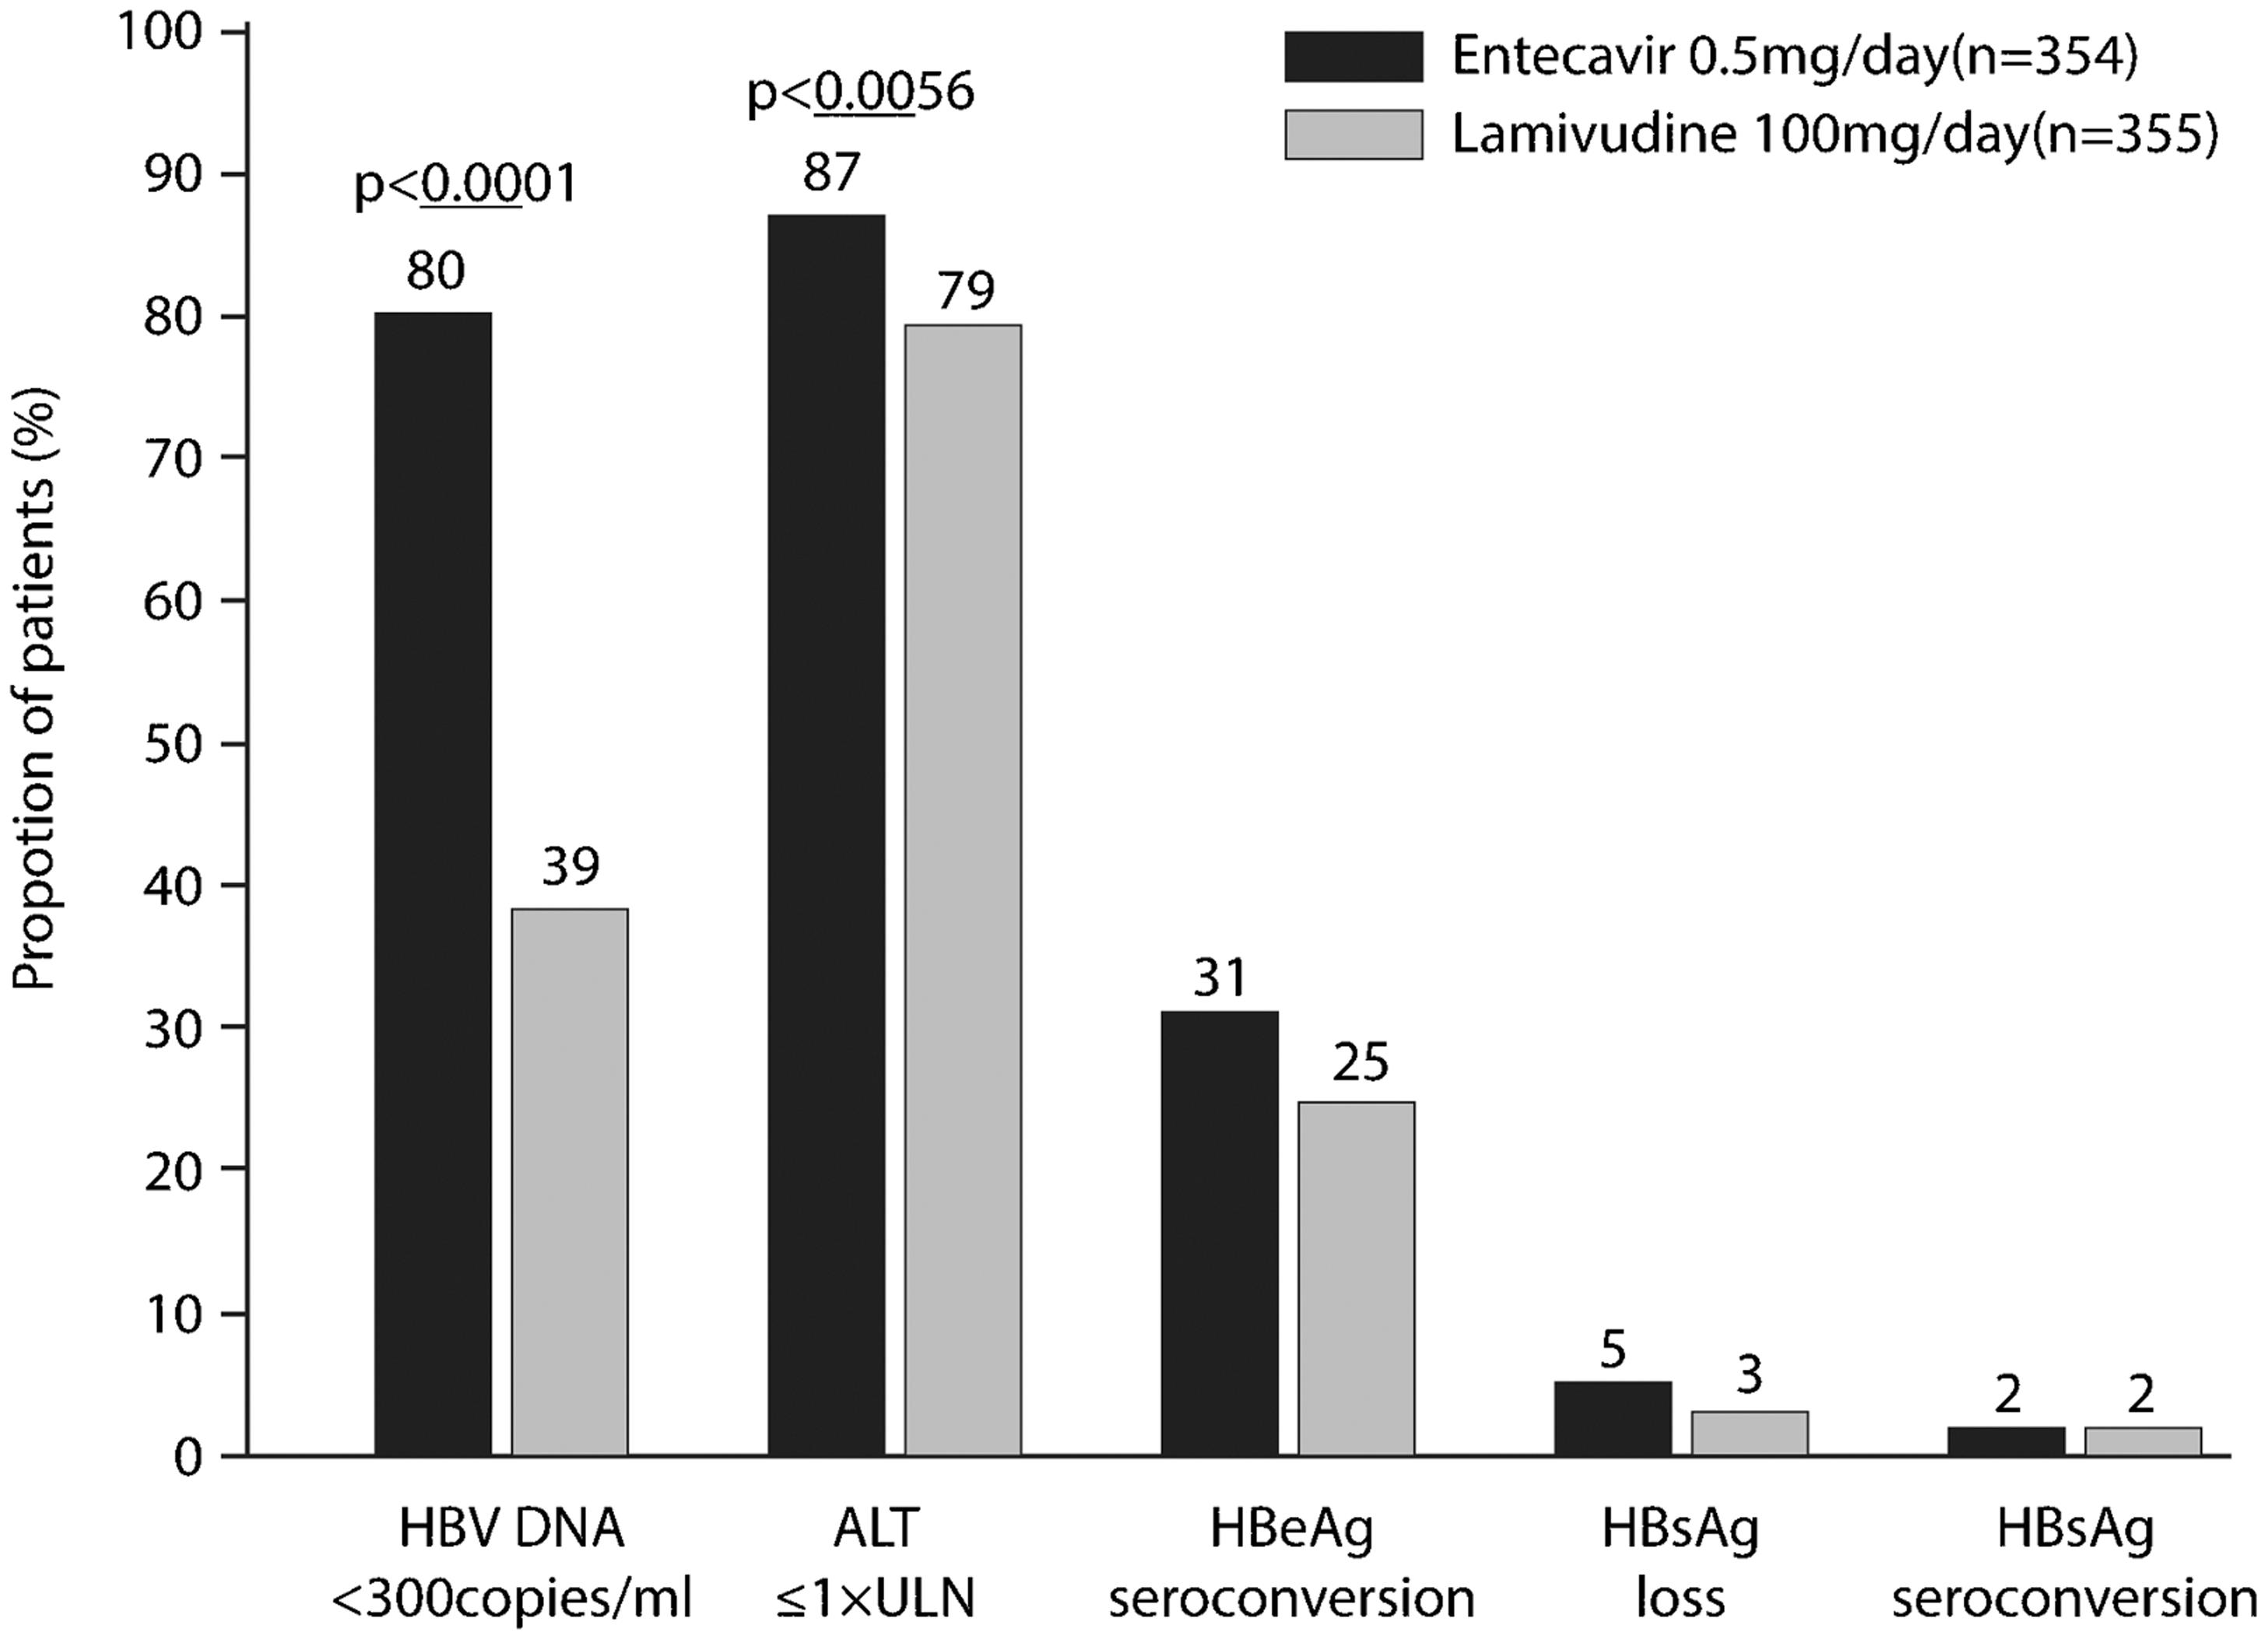 Cumulative confirmed proportions of all treated patients who achieved undetectable levels of hepatitis B virus (HBV) DNA, normalization of serum alanine aminotransferase (ALT), or a serologic end point through 96 weeks of treatment